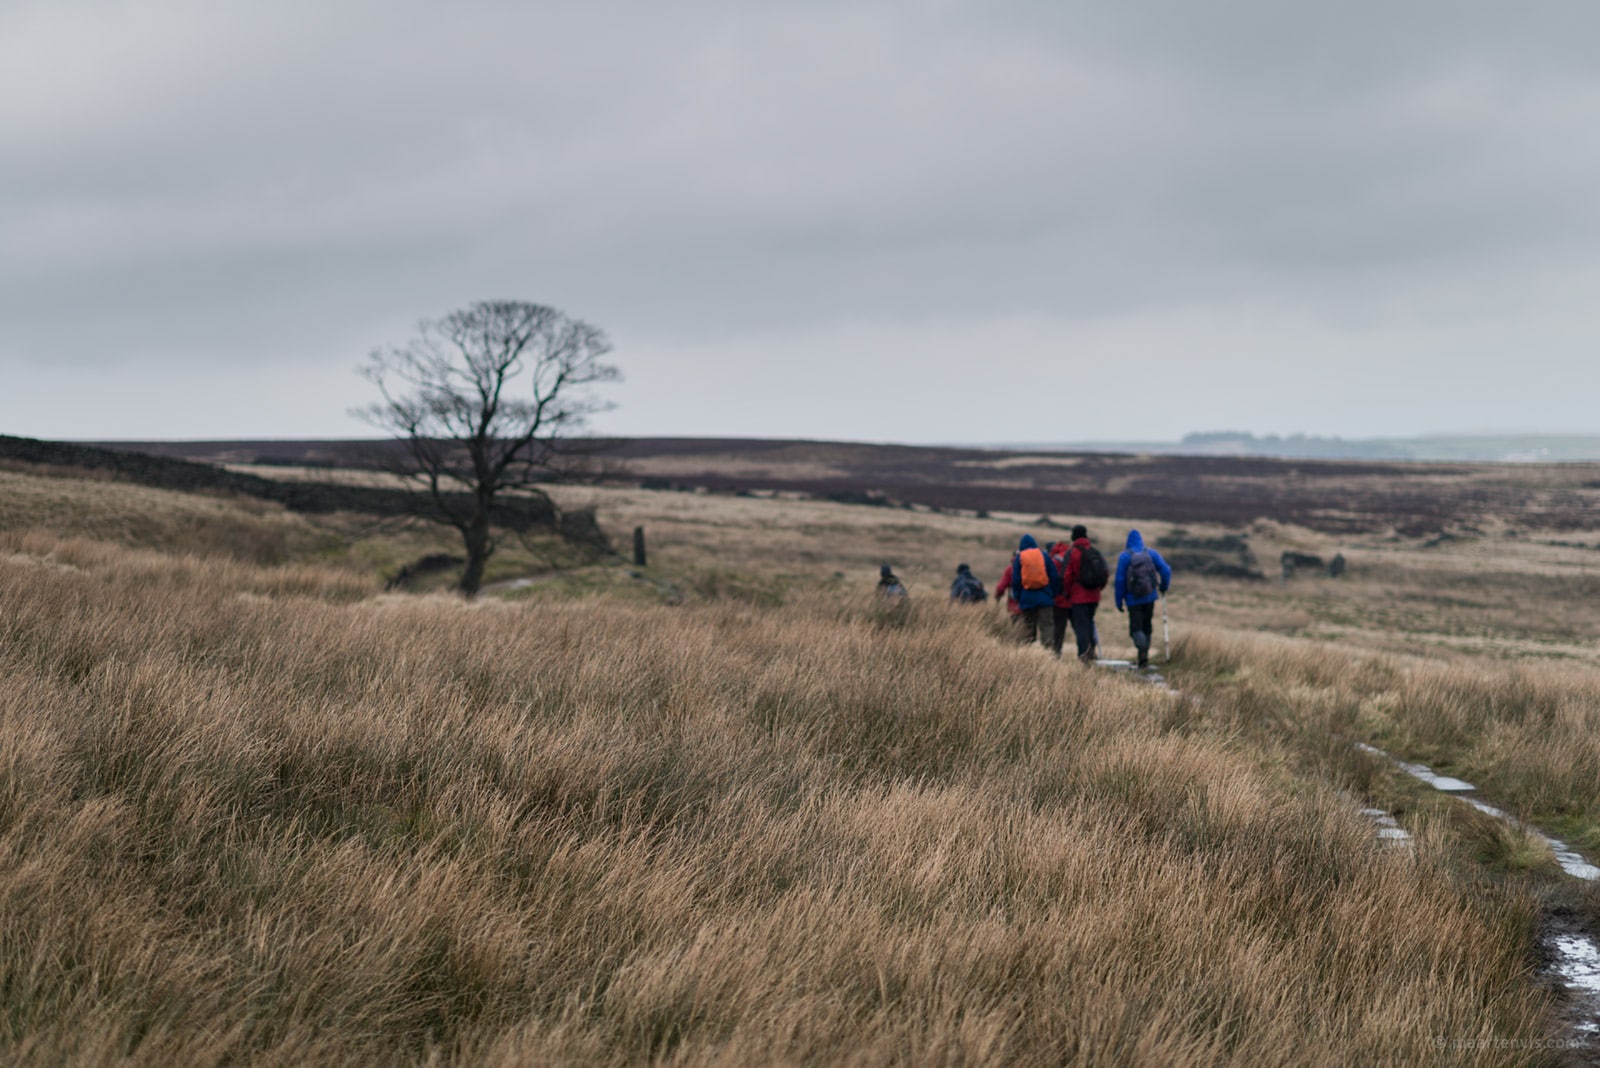 20160324 8135 - Hiking on the Moors with the Brontë sisters